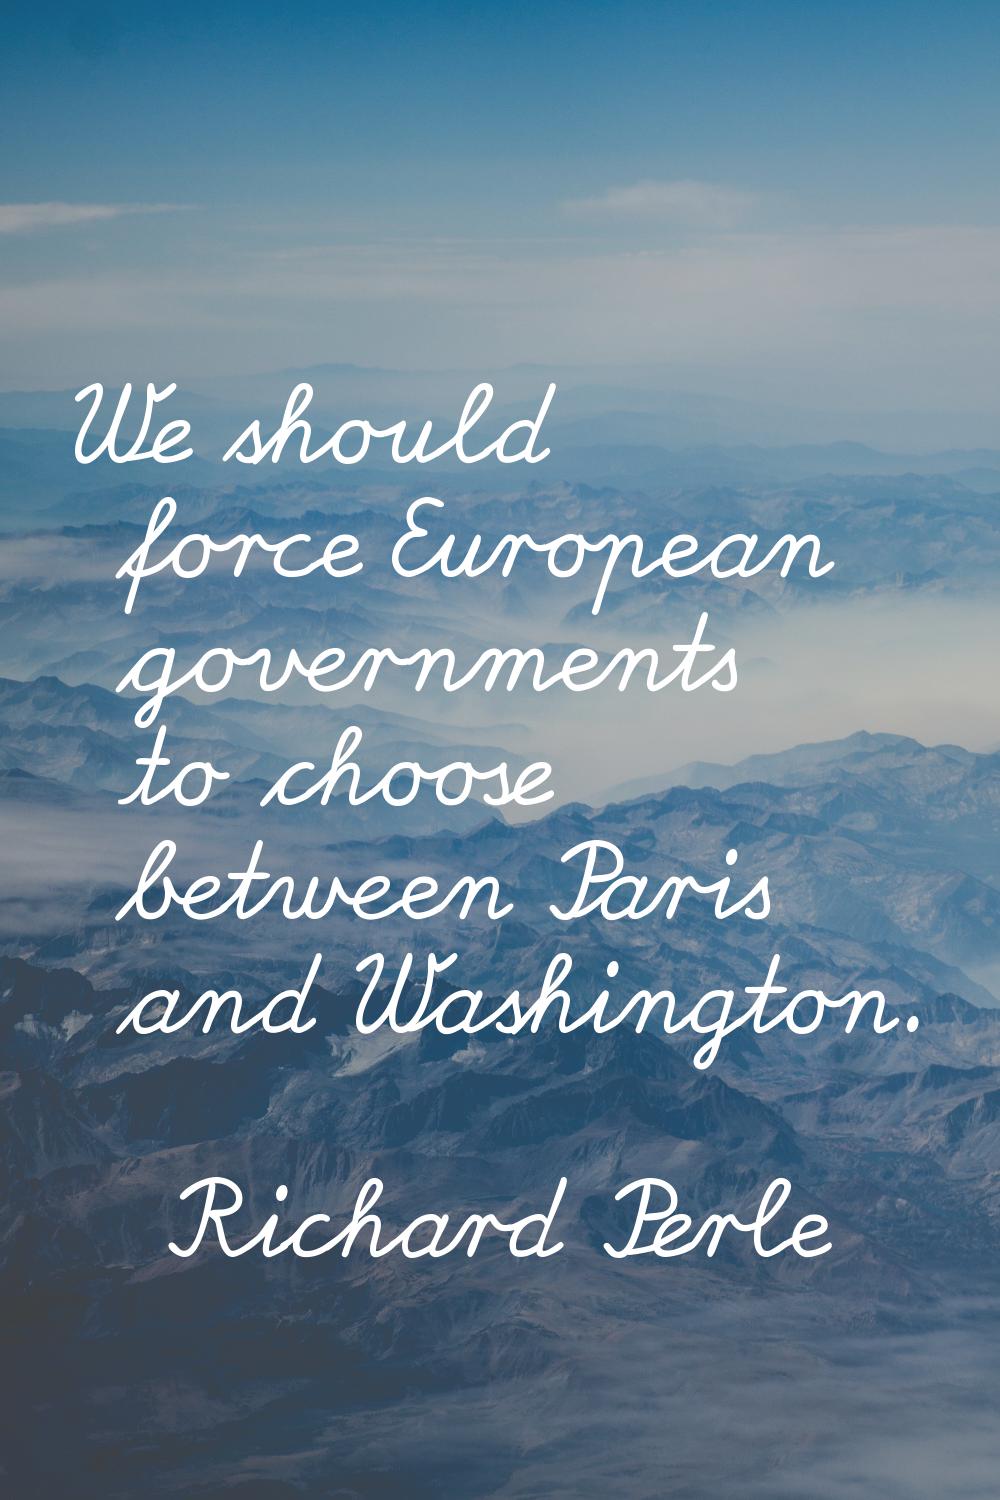 We should force European governments to choose between Paris and Washington.